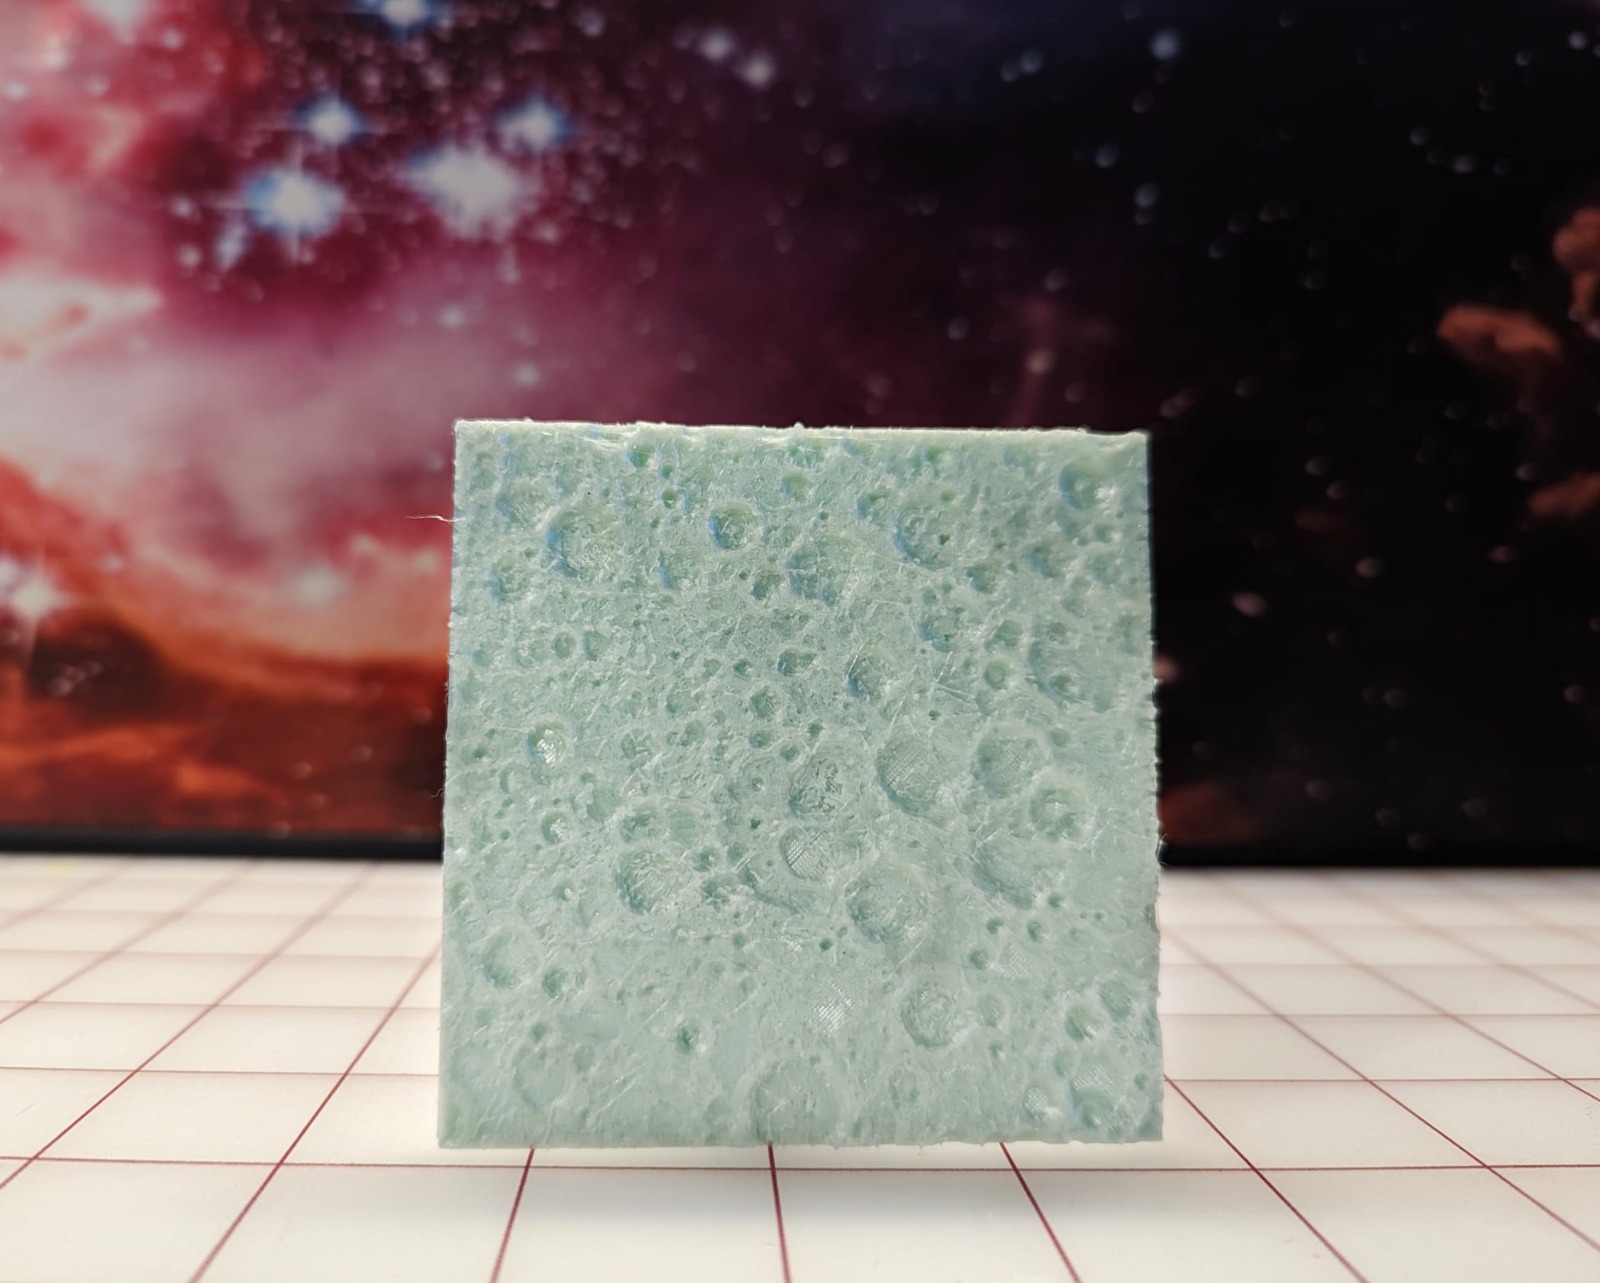 3D printed topographic map of the far side of the moon.